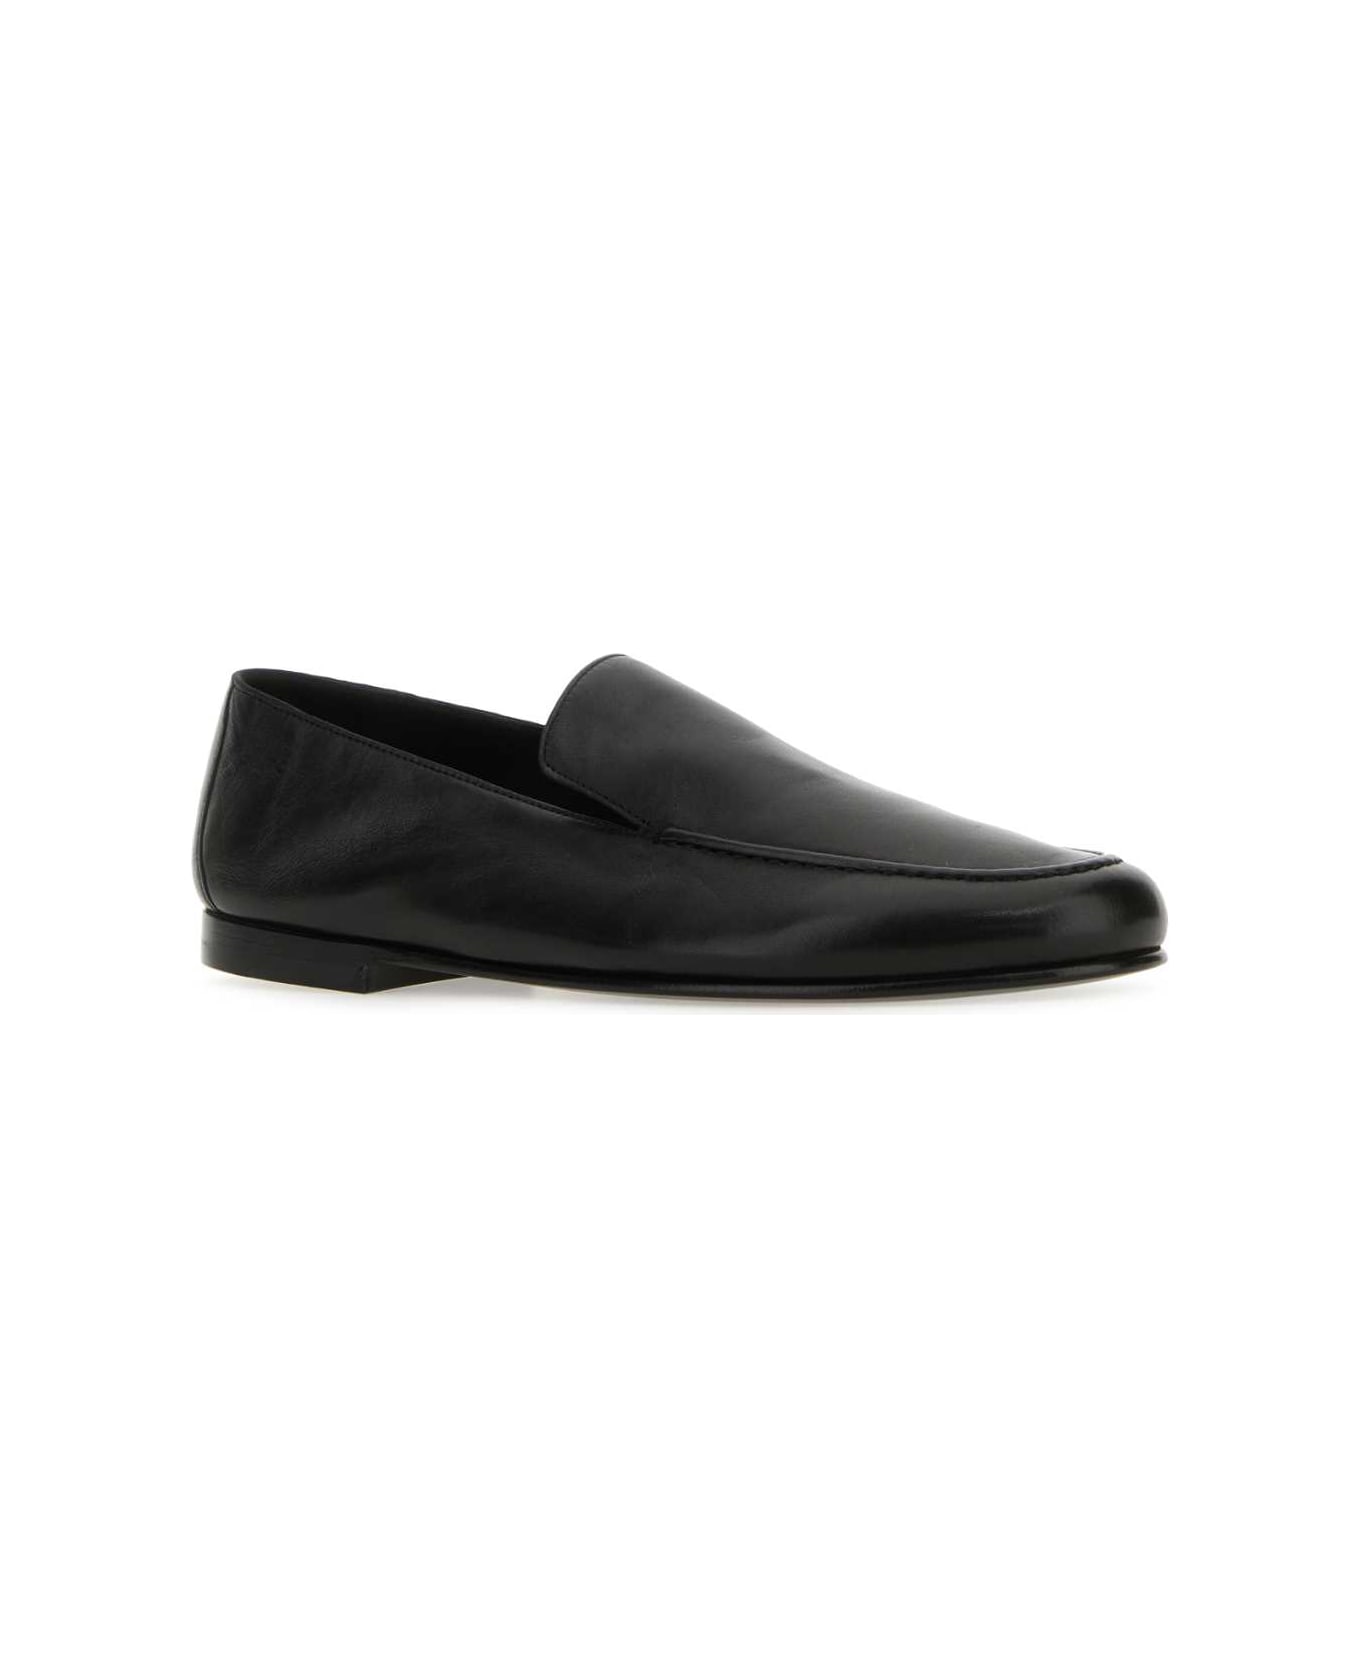 The Row Black Leather Colette Loafers - Black